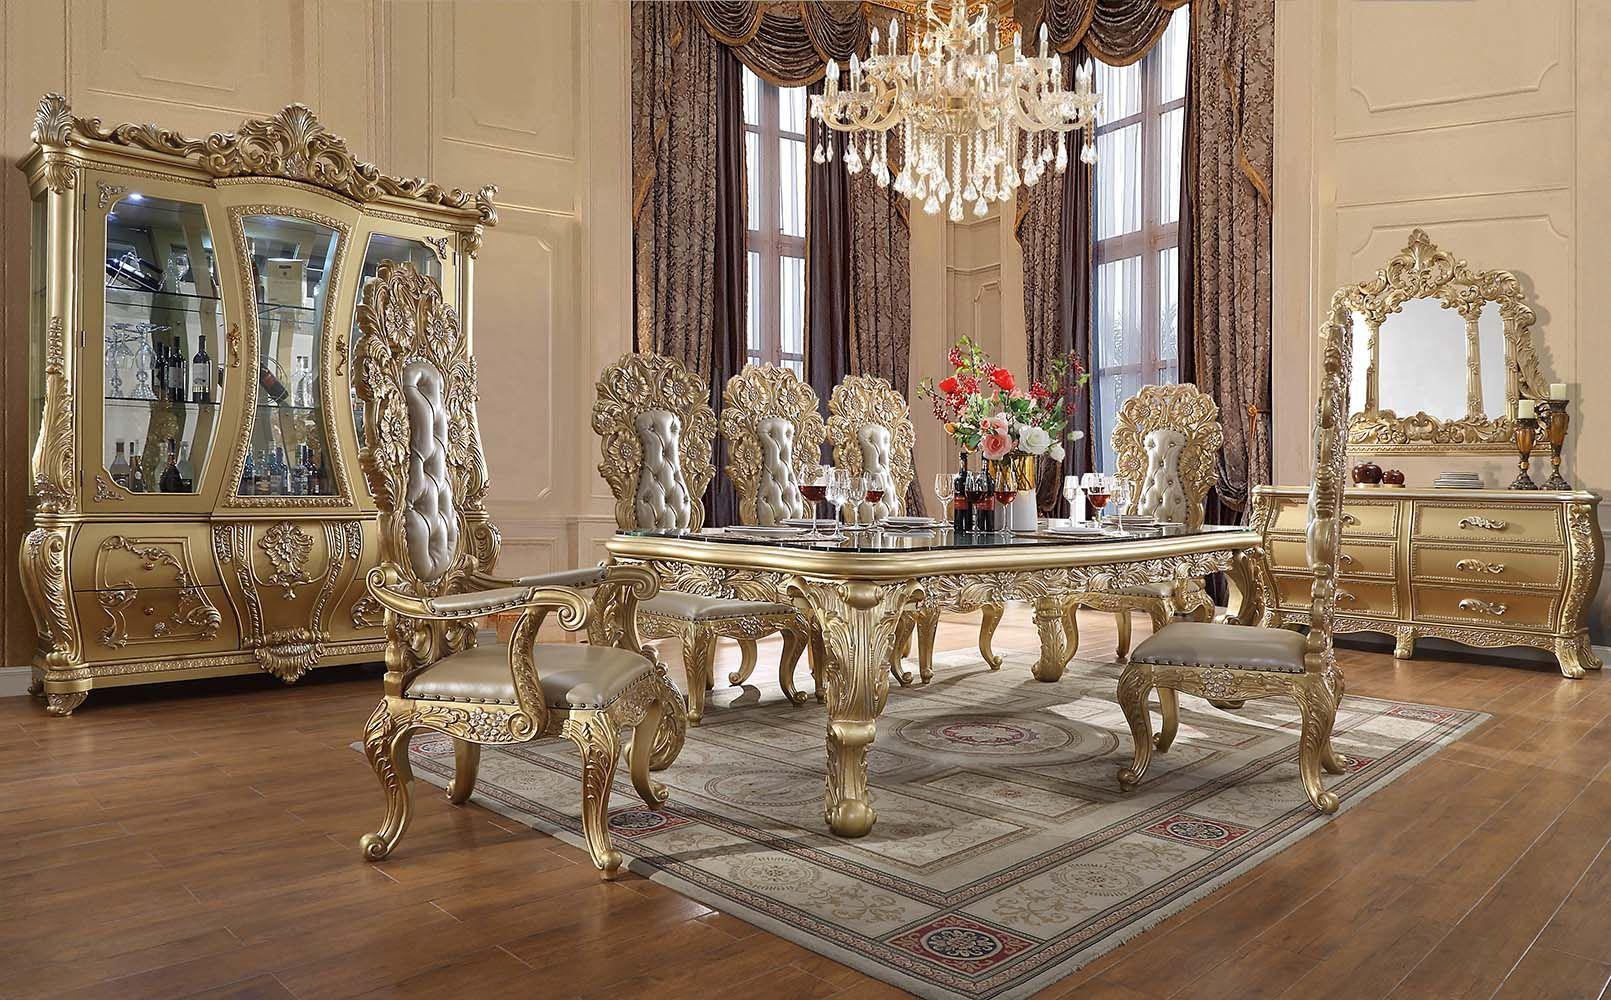 Classic Dining Room Set Cabriole Dining Room Set 9PCS DN01482-T-9PCS DN01482-T-7PCS in Gold PU